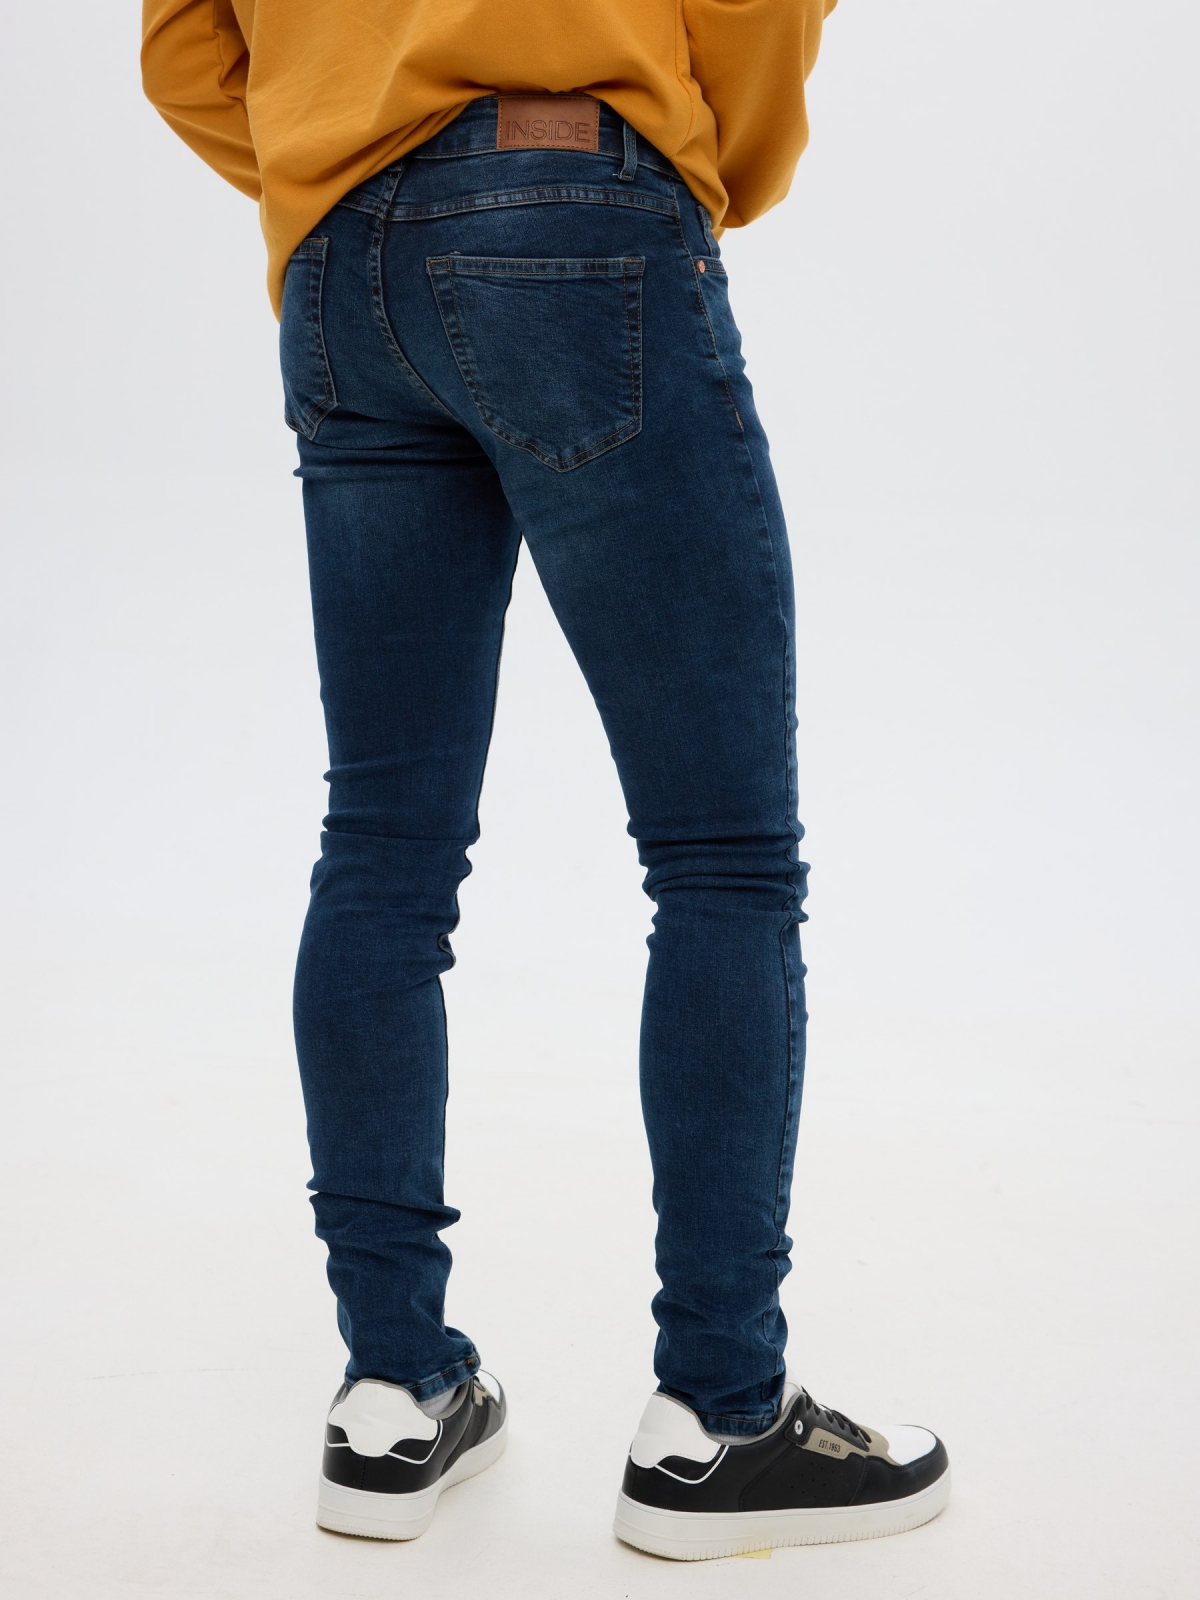 SuperSlim Jeans blue front view